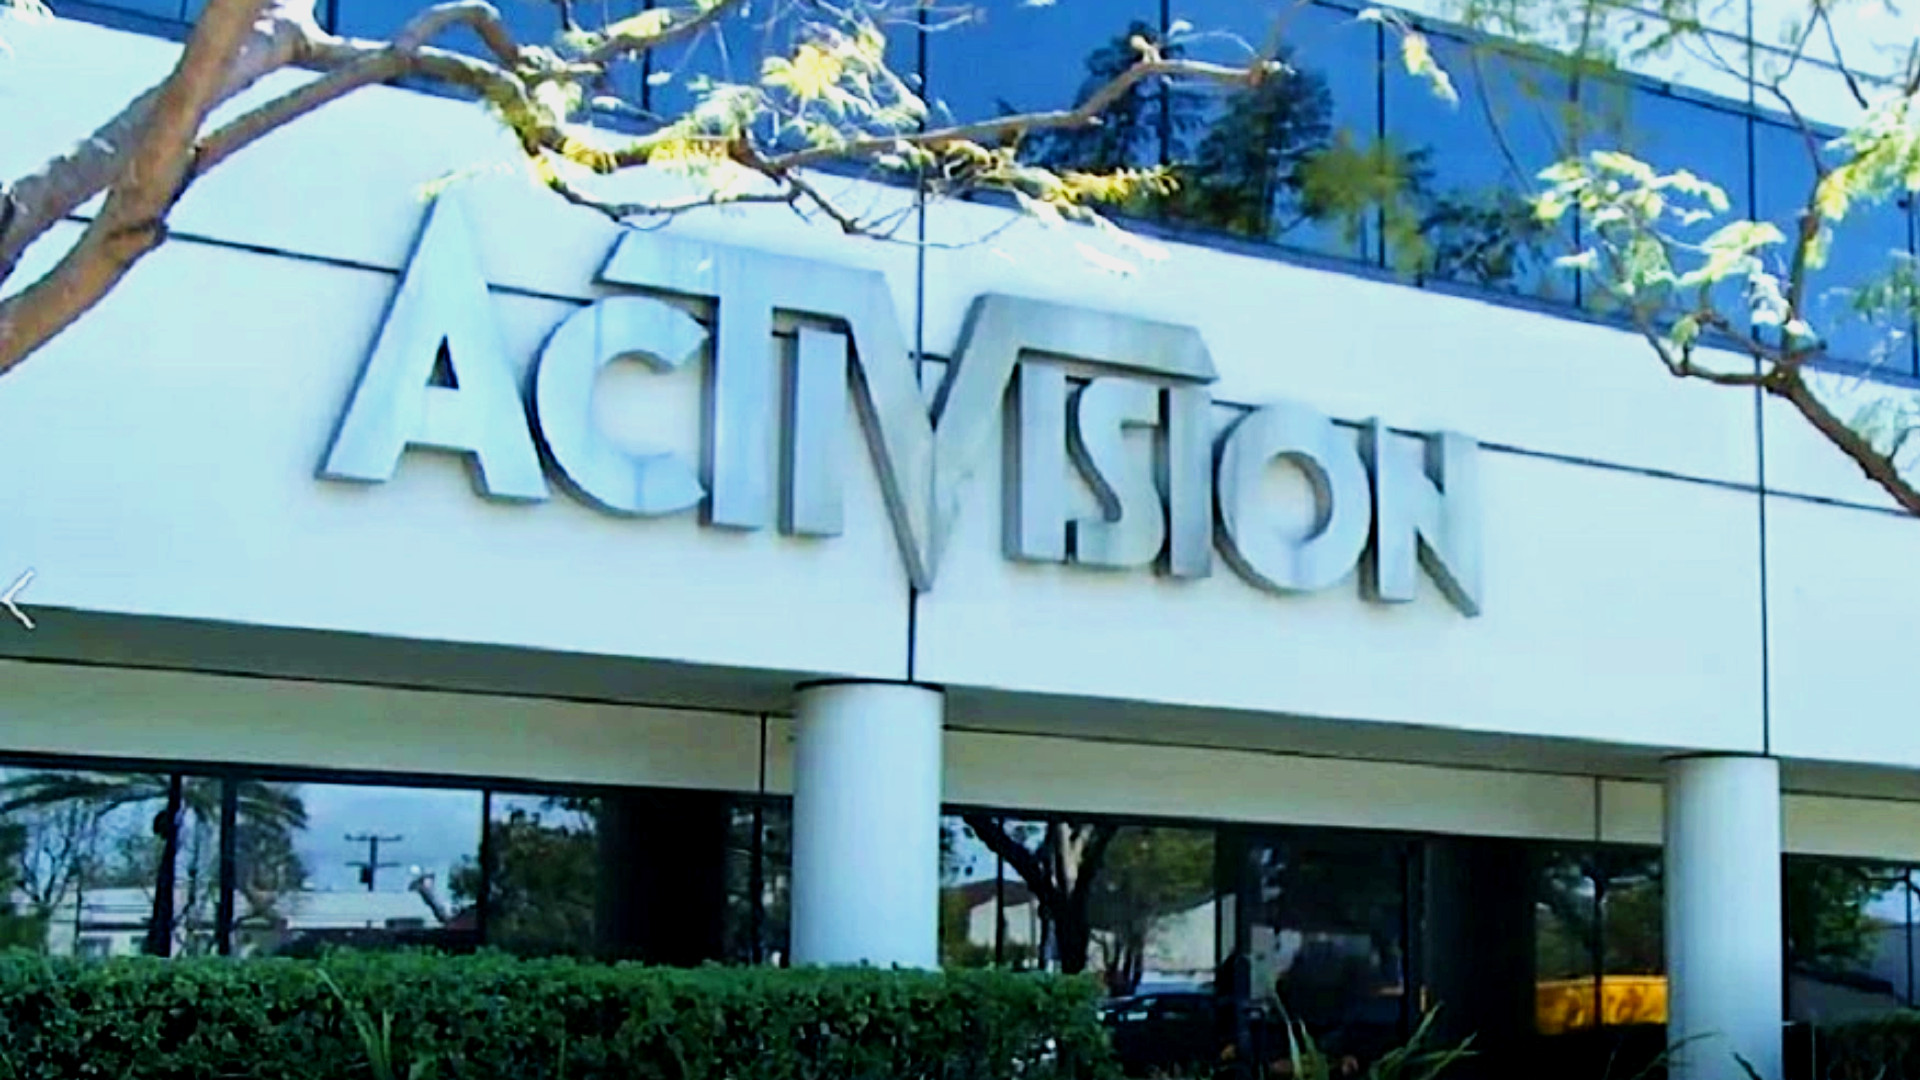 UK competition authority investigates Microsoft Activision deal